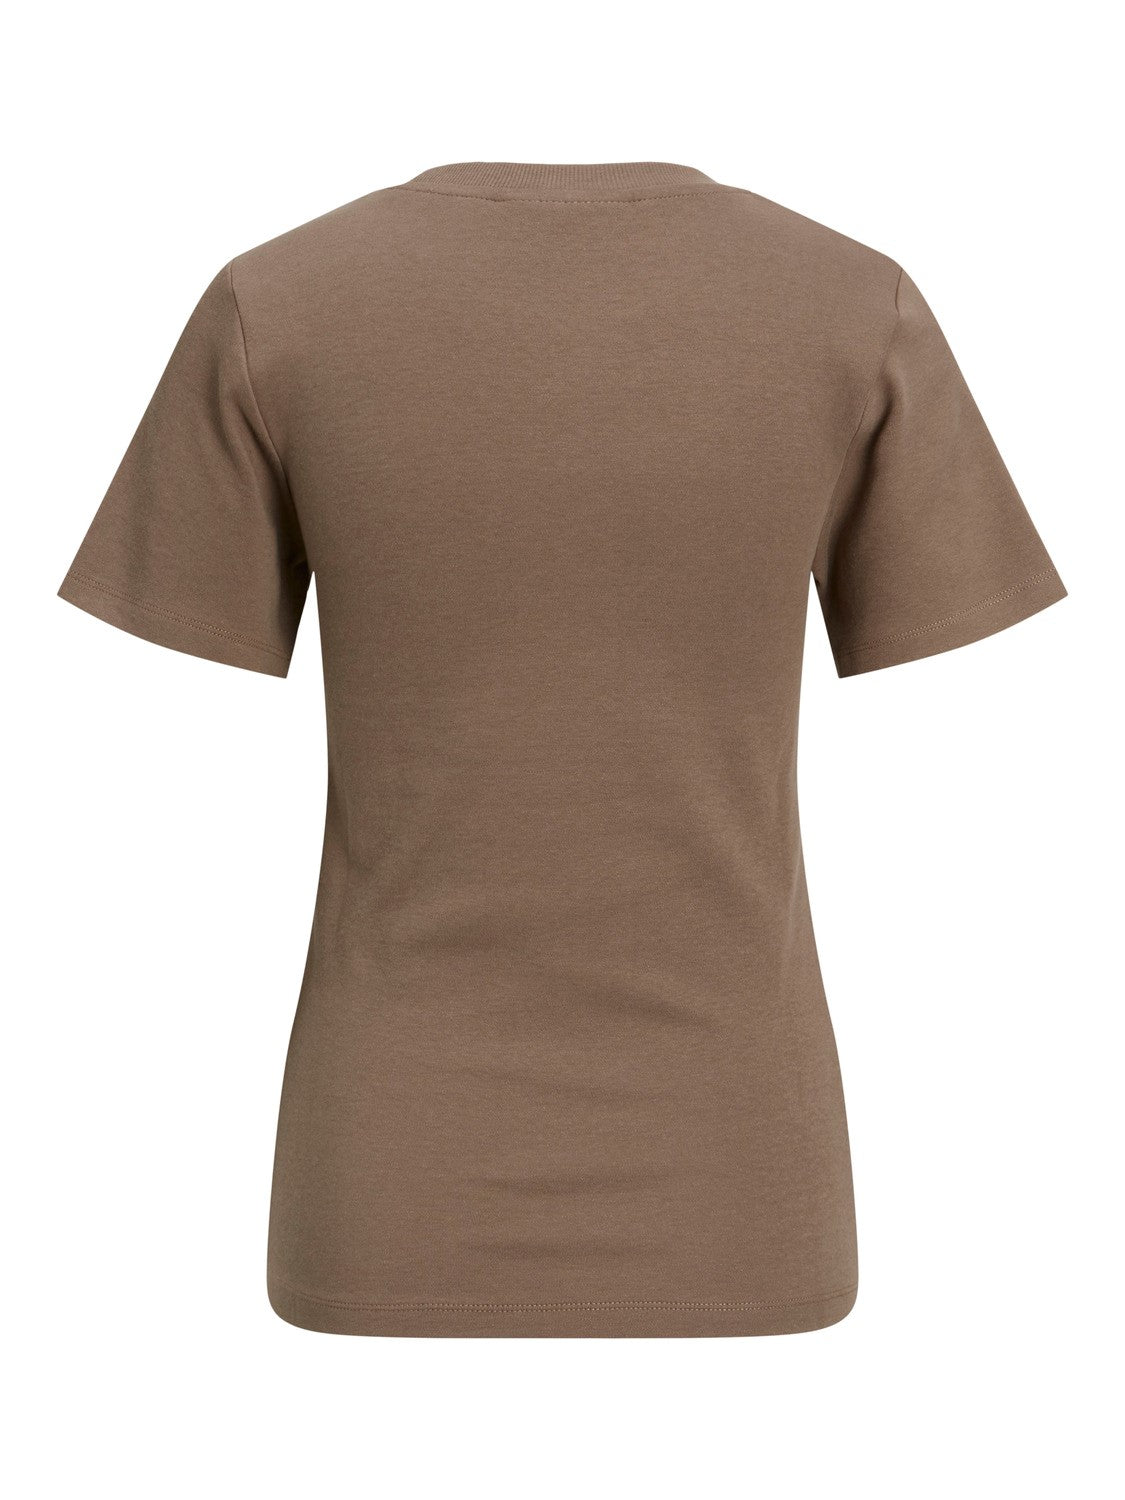 XBELLE T-Shirt Brown